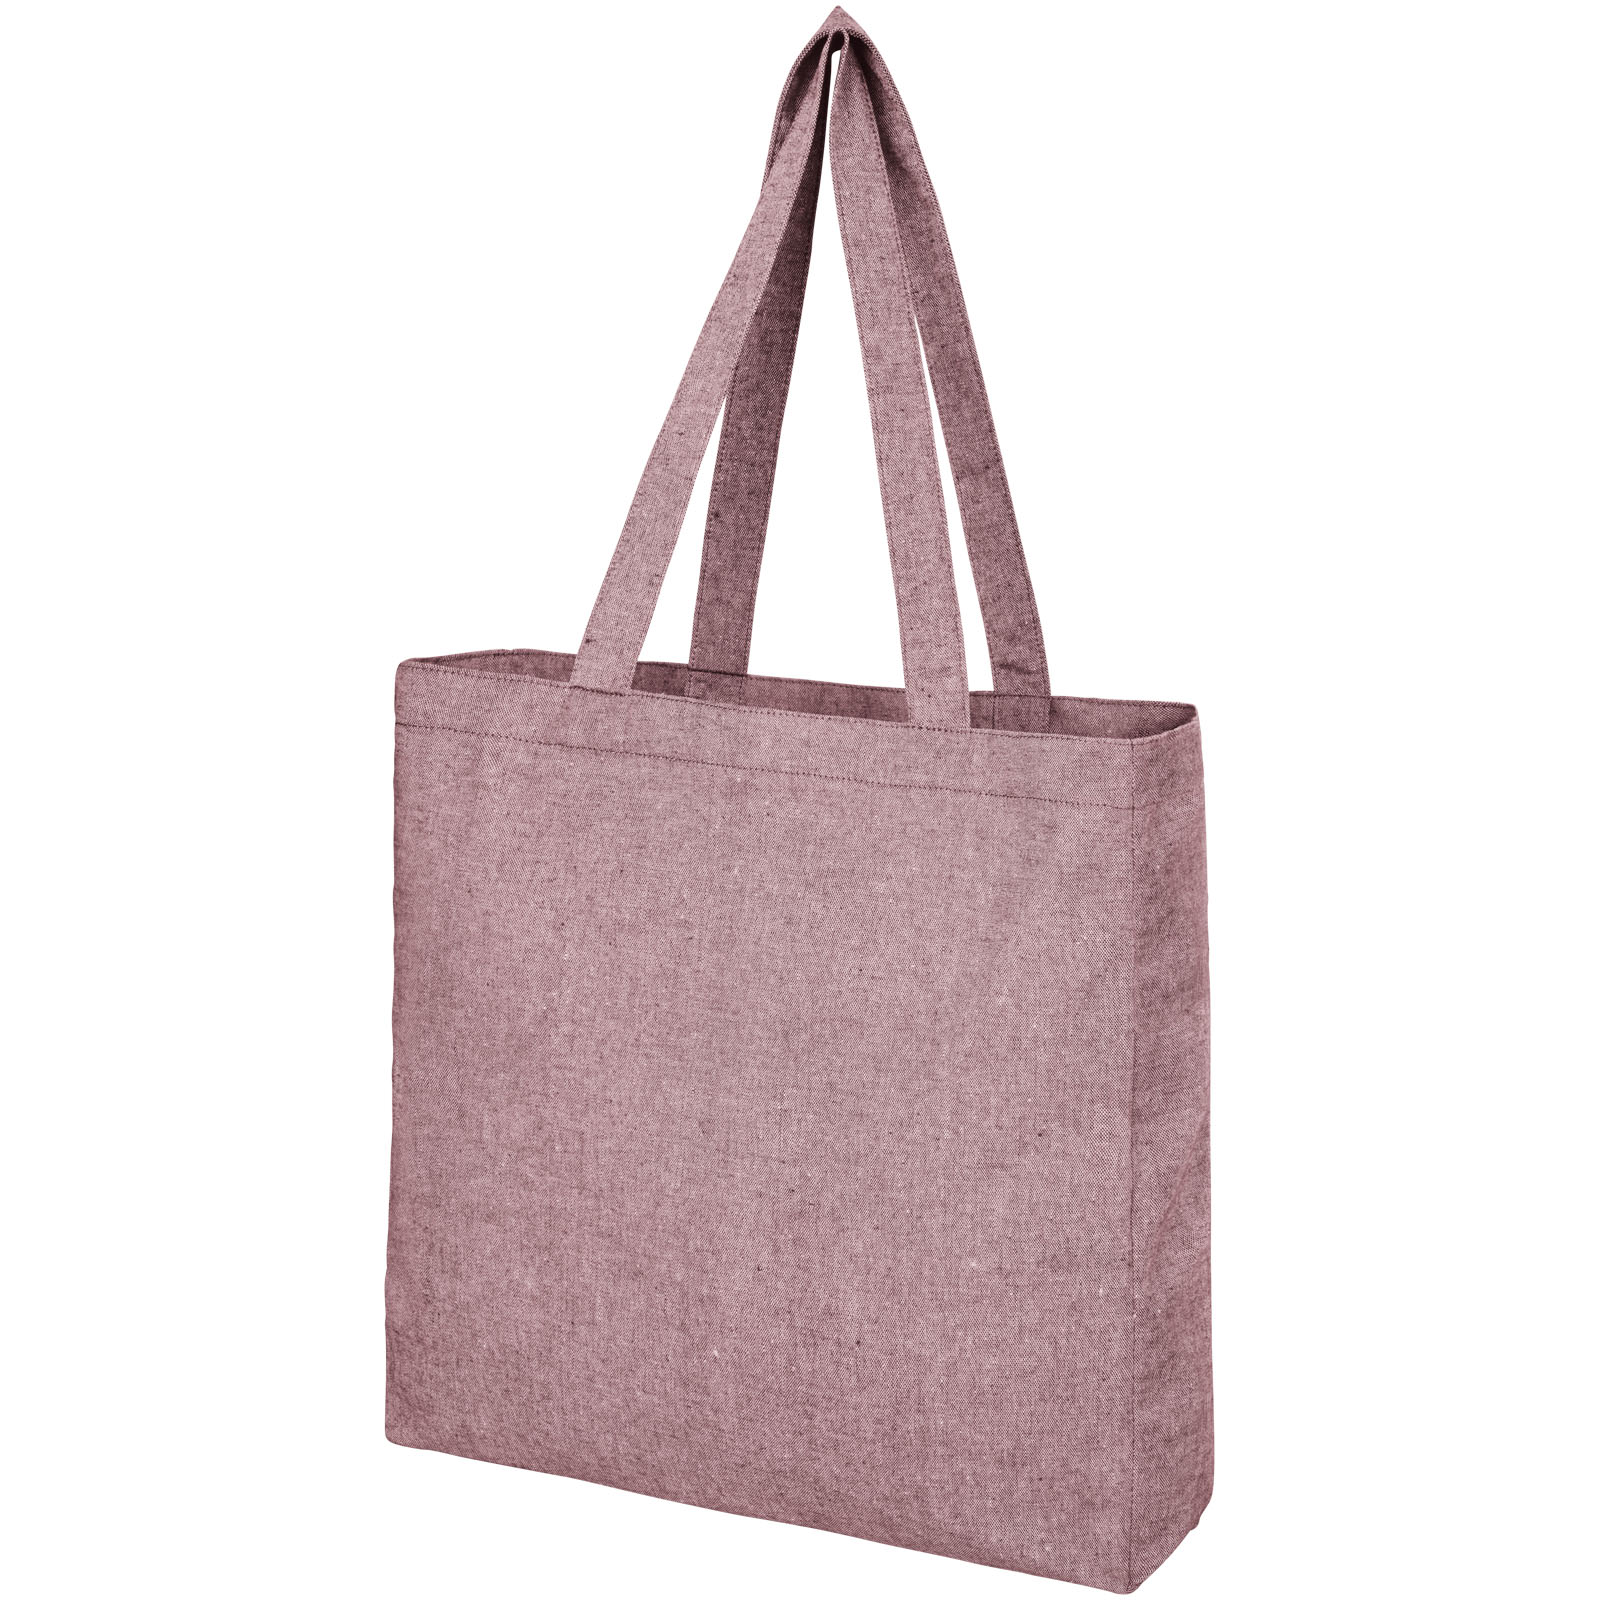 Bags - Pheebs 210 g/m² recycled gusset tote bag 13L